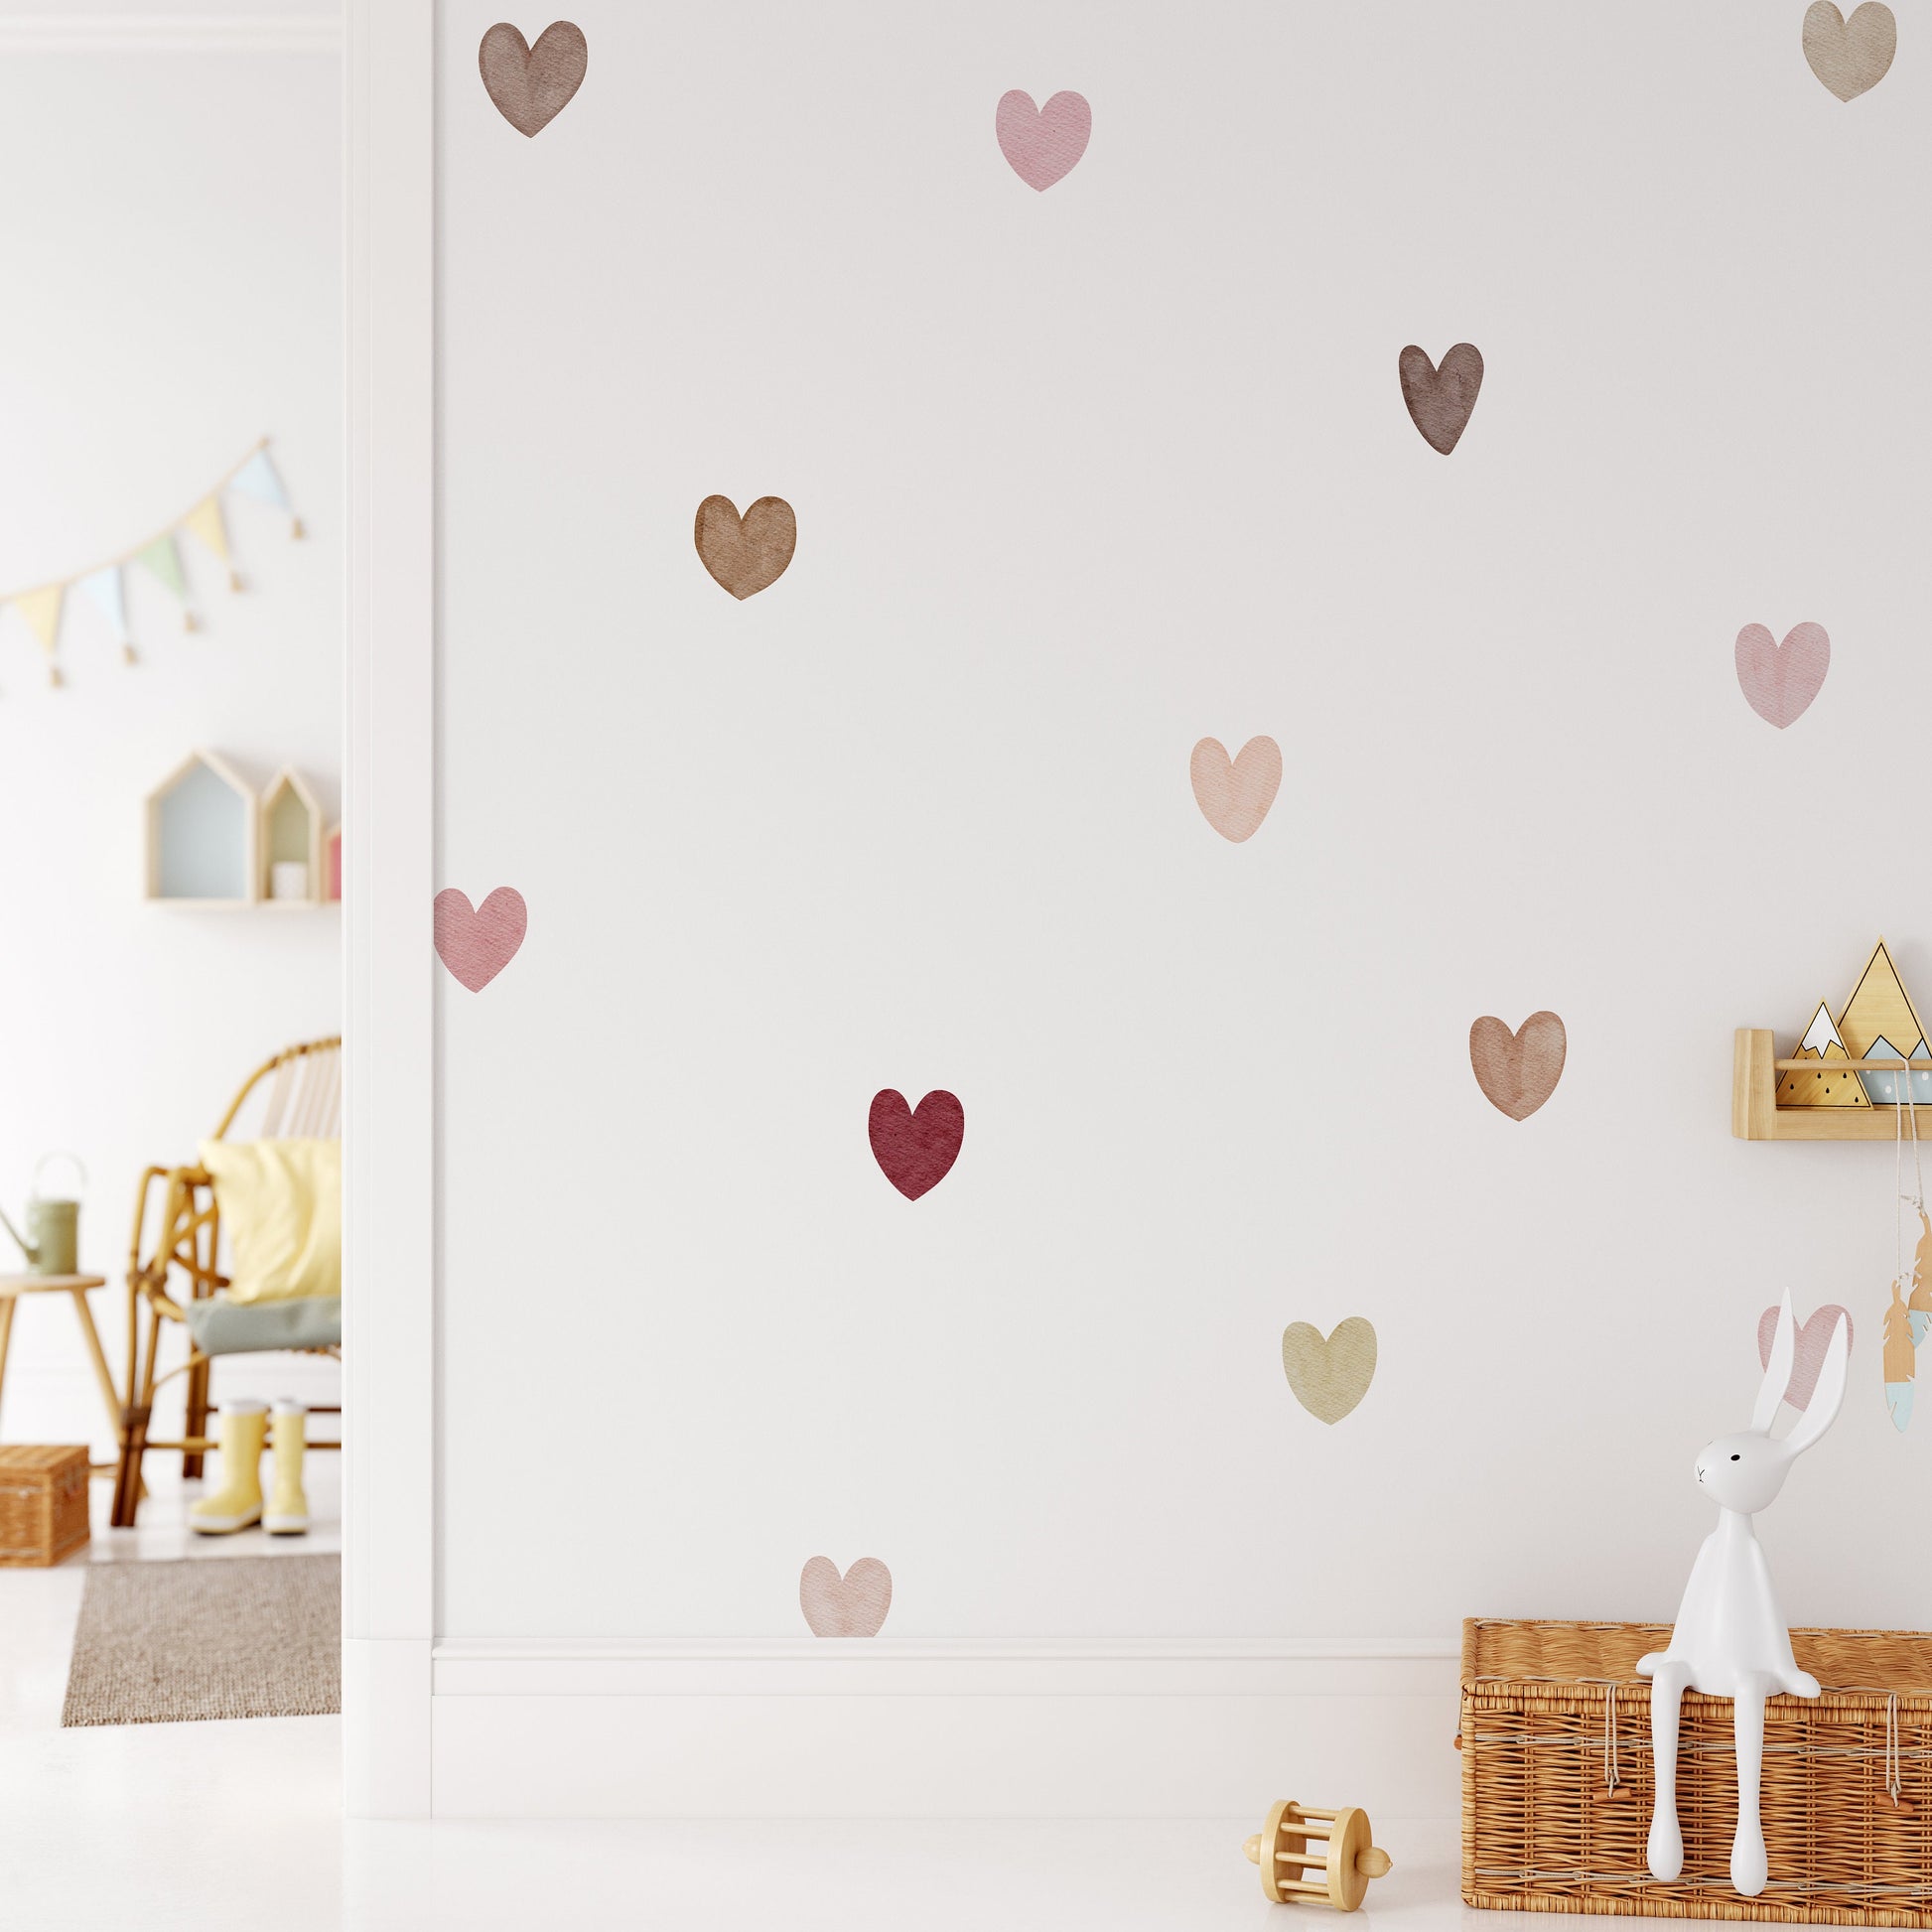 Rustic Boho Chic Heart Wall Stickers For Kids Rooms Nursery Decals Bedroom Stickers